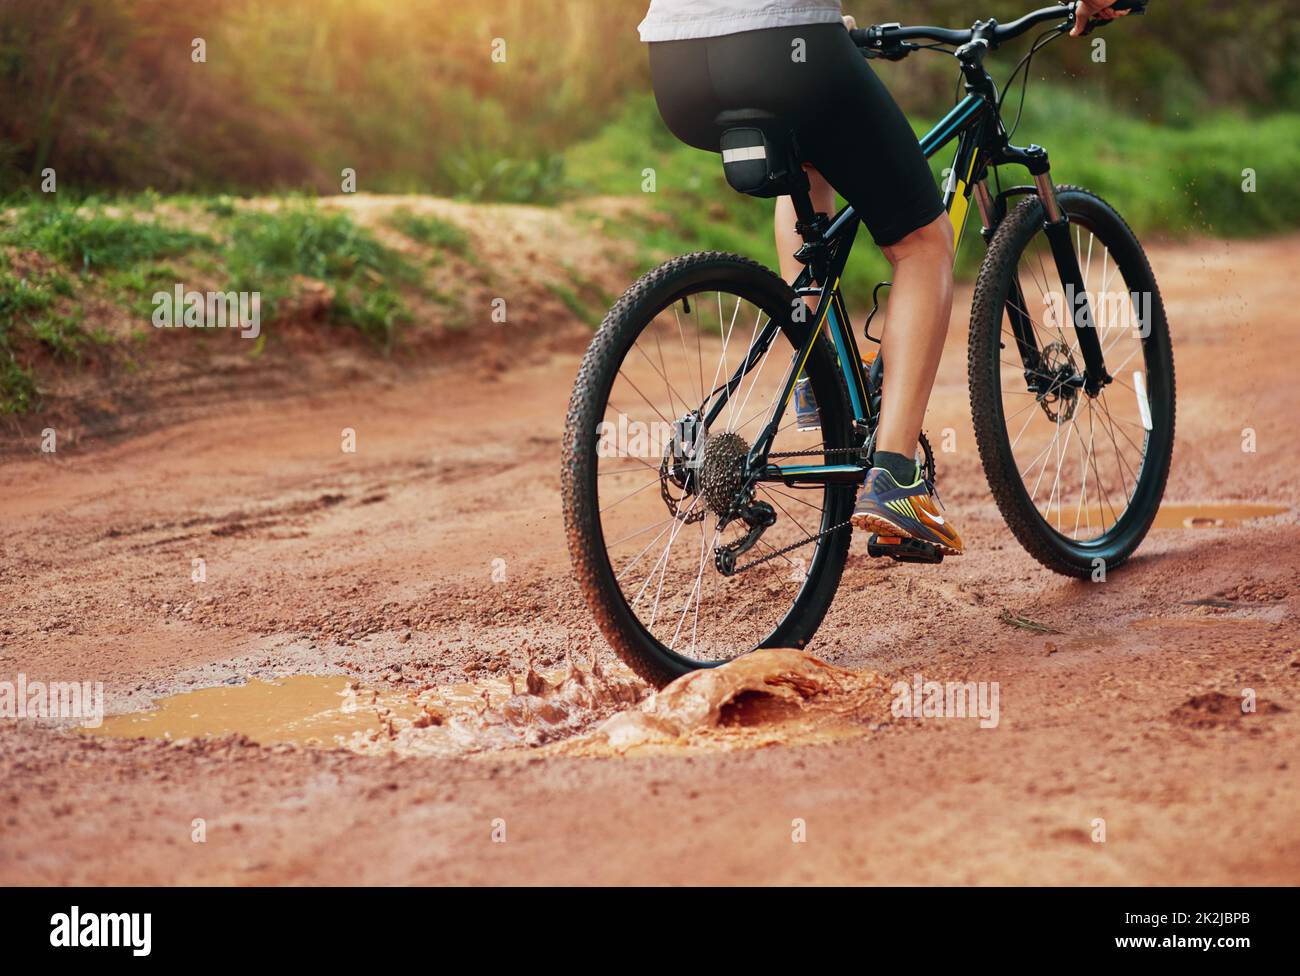 What an exhilarating hobby. Shot of a female mountain biker out for an early morning ride. Stock Photo